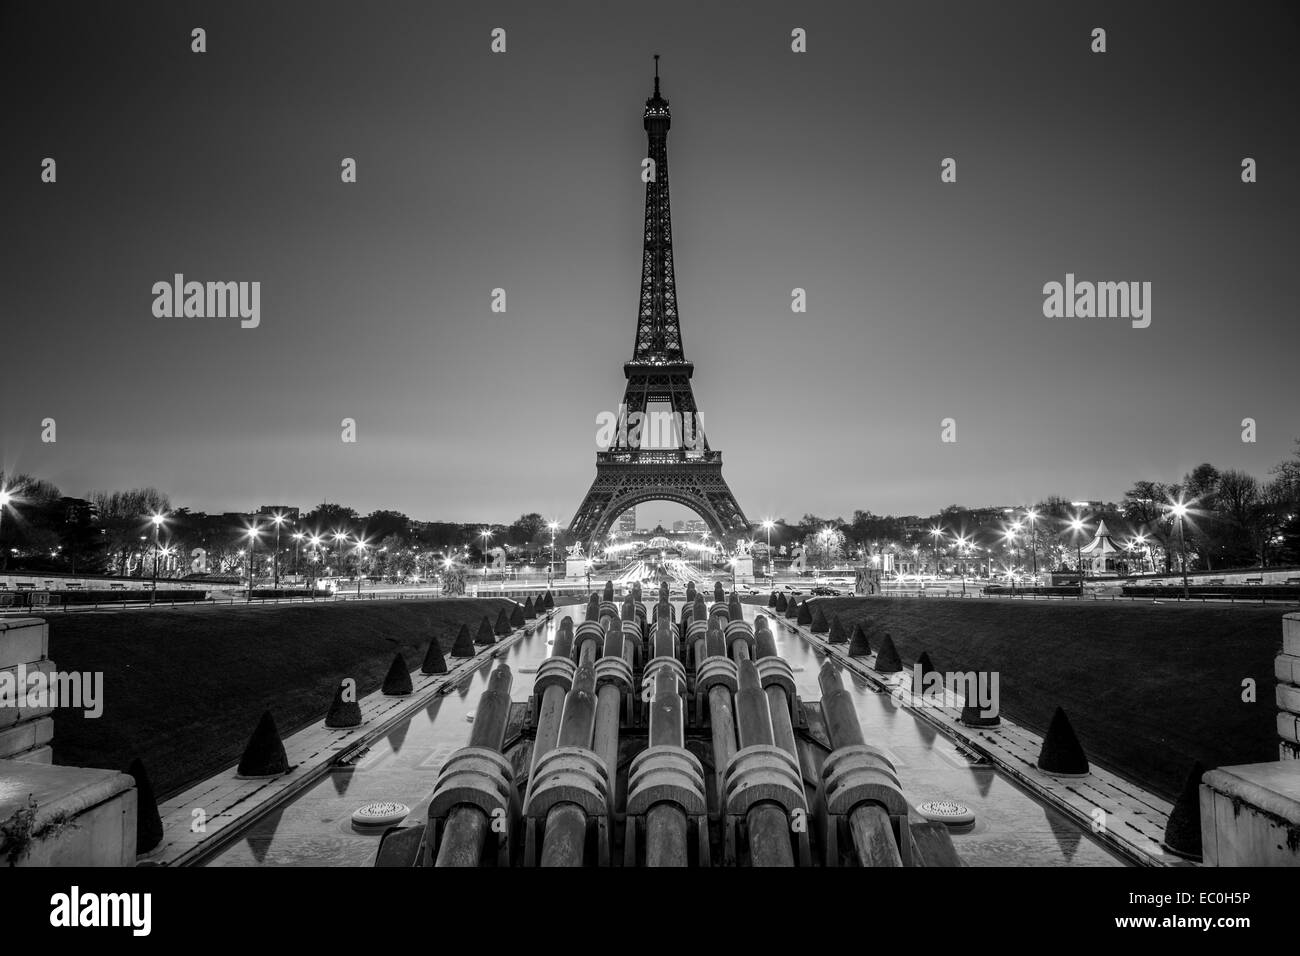 Eiffel tower, Paris, France in black and white. Stock Photo